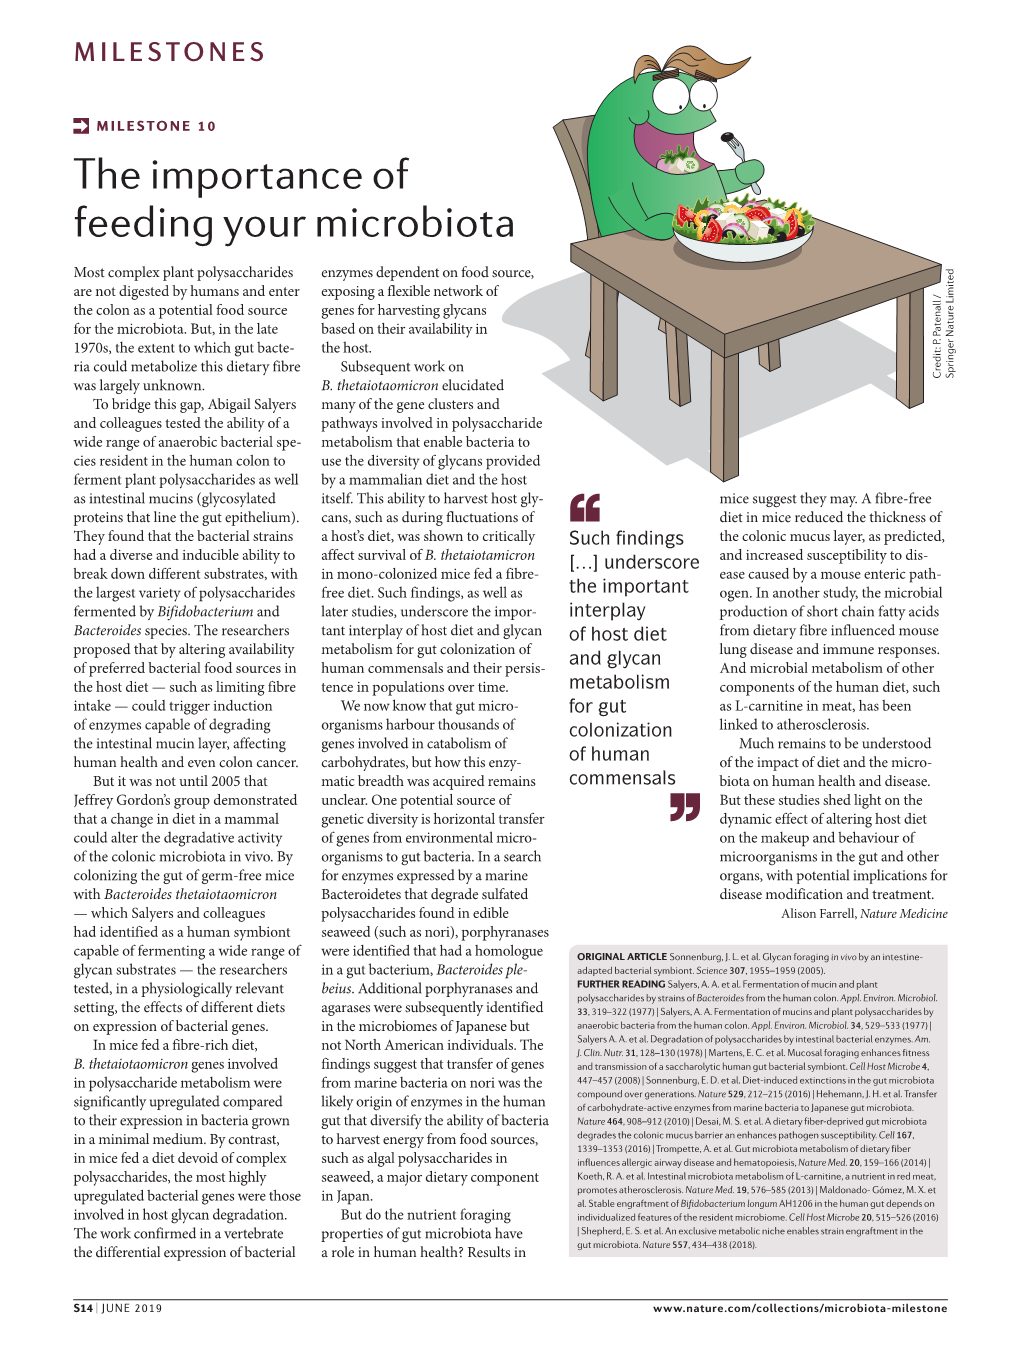 The Importance of Feeding Your Microbiota